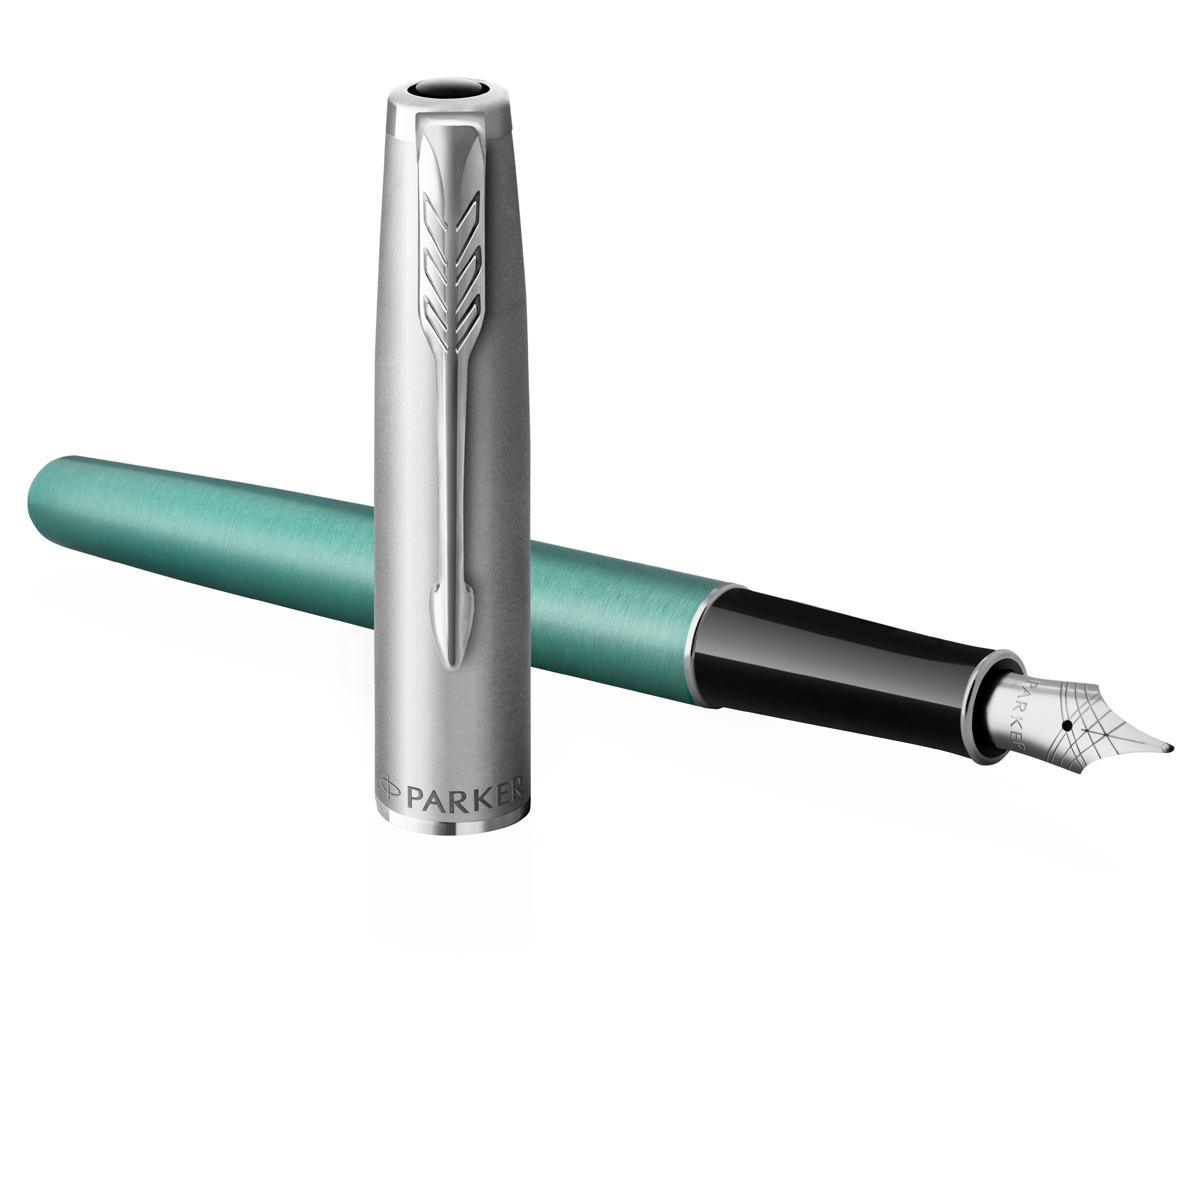   Parker "Sonnet Sand Blasted Metal&Green Lacquer" , 0,8,   